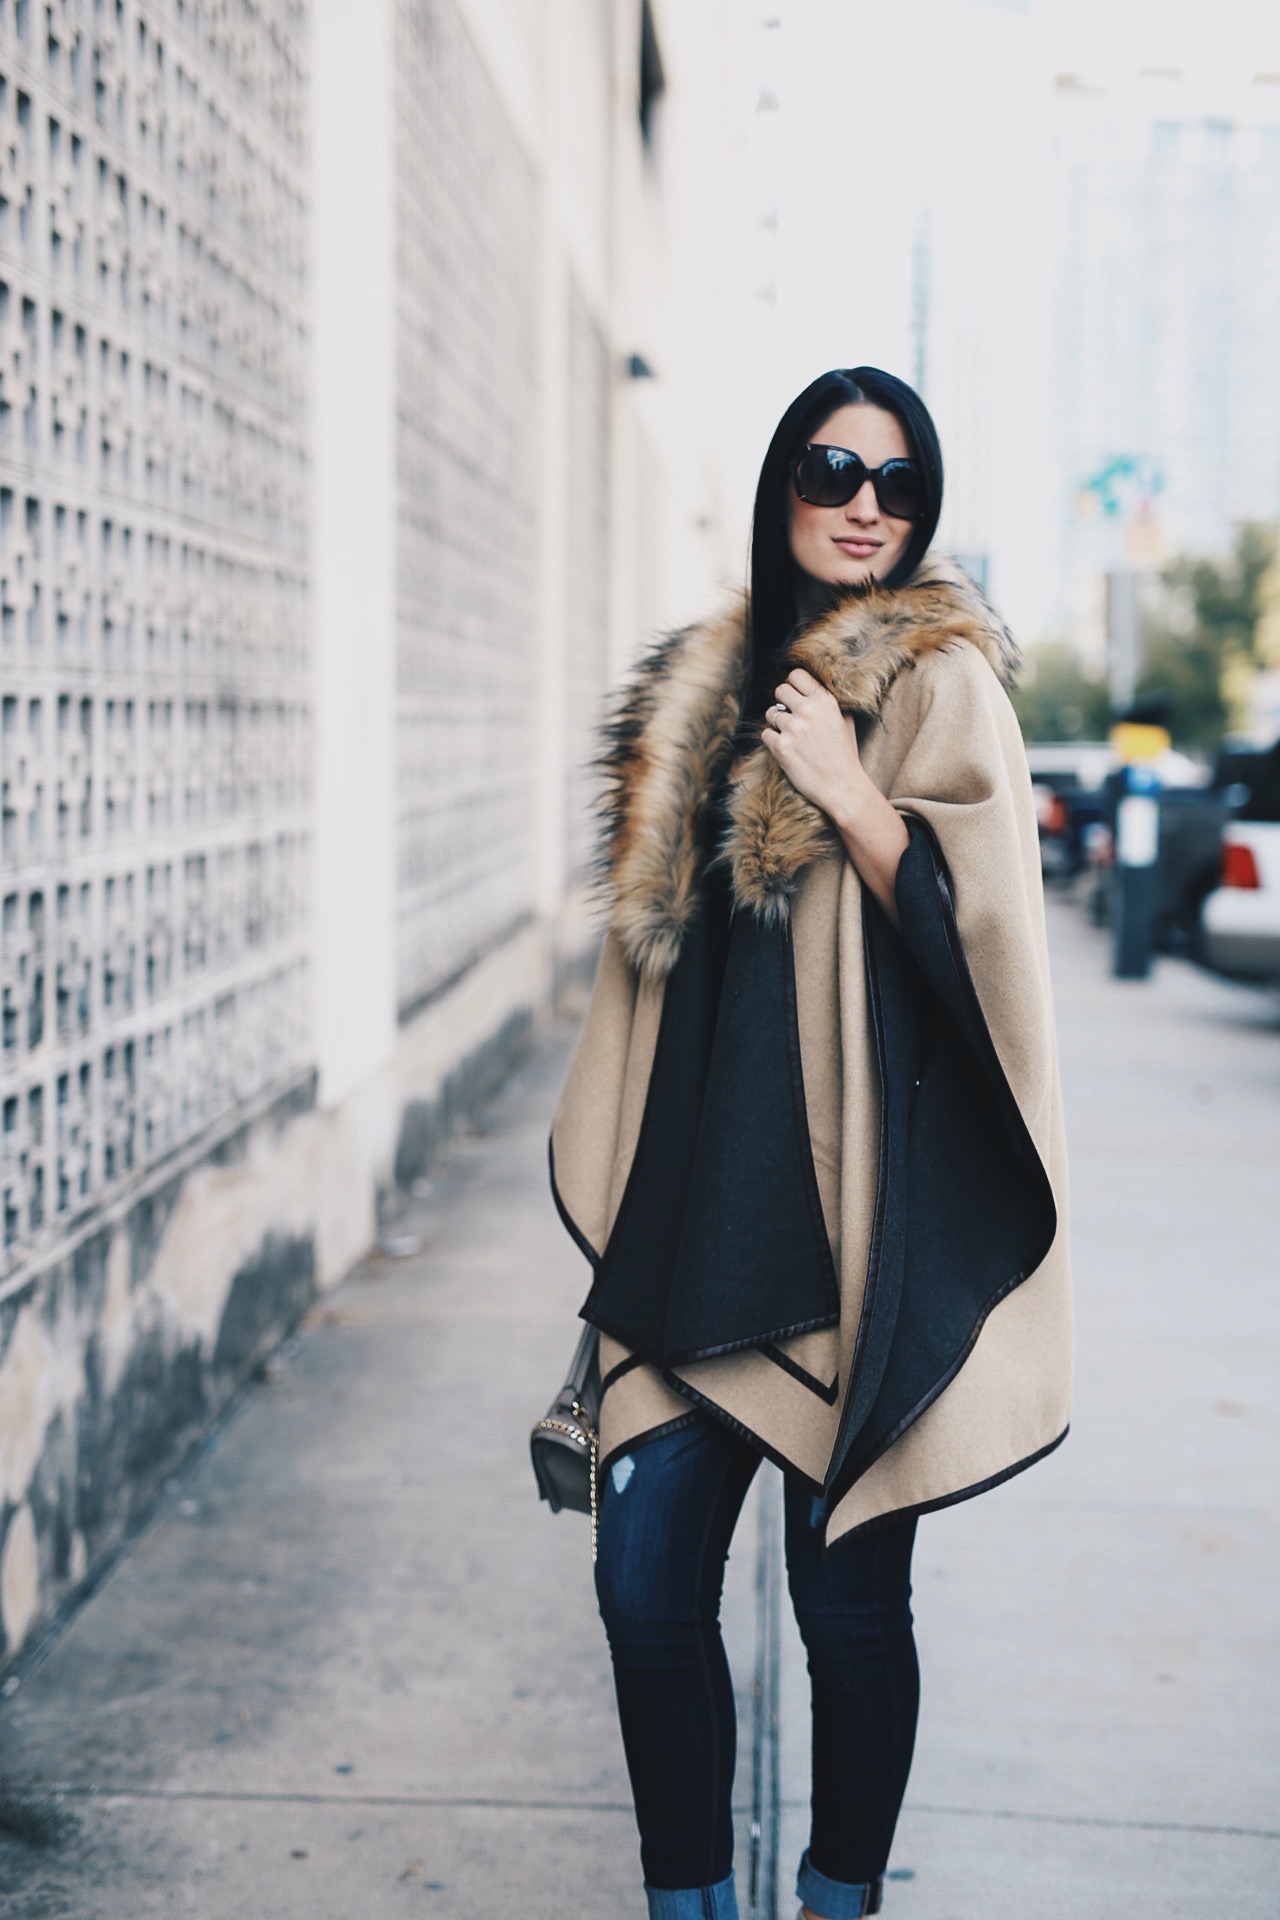 Faux Fur Cape | how to style a fur cape | how to wear a fur cape | faux fur fashion | styling faux fur | fall fashion tips | fall outfit ideas | fall style tips | what to wear for fall | cool weather fashion | fashion for fall | style tips for fall | outfit ideas for fall || Dressed to Kill #fauxfur #capestyle #furcape